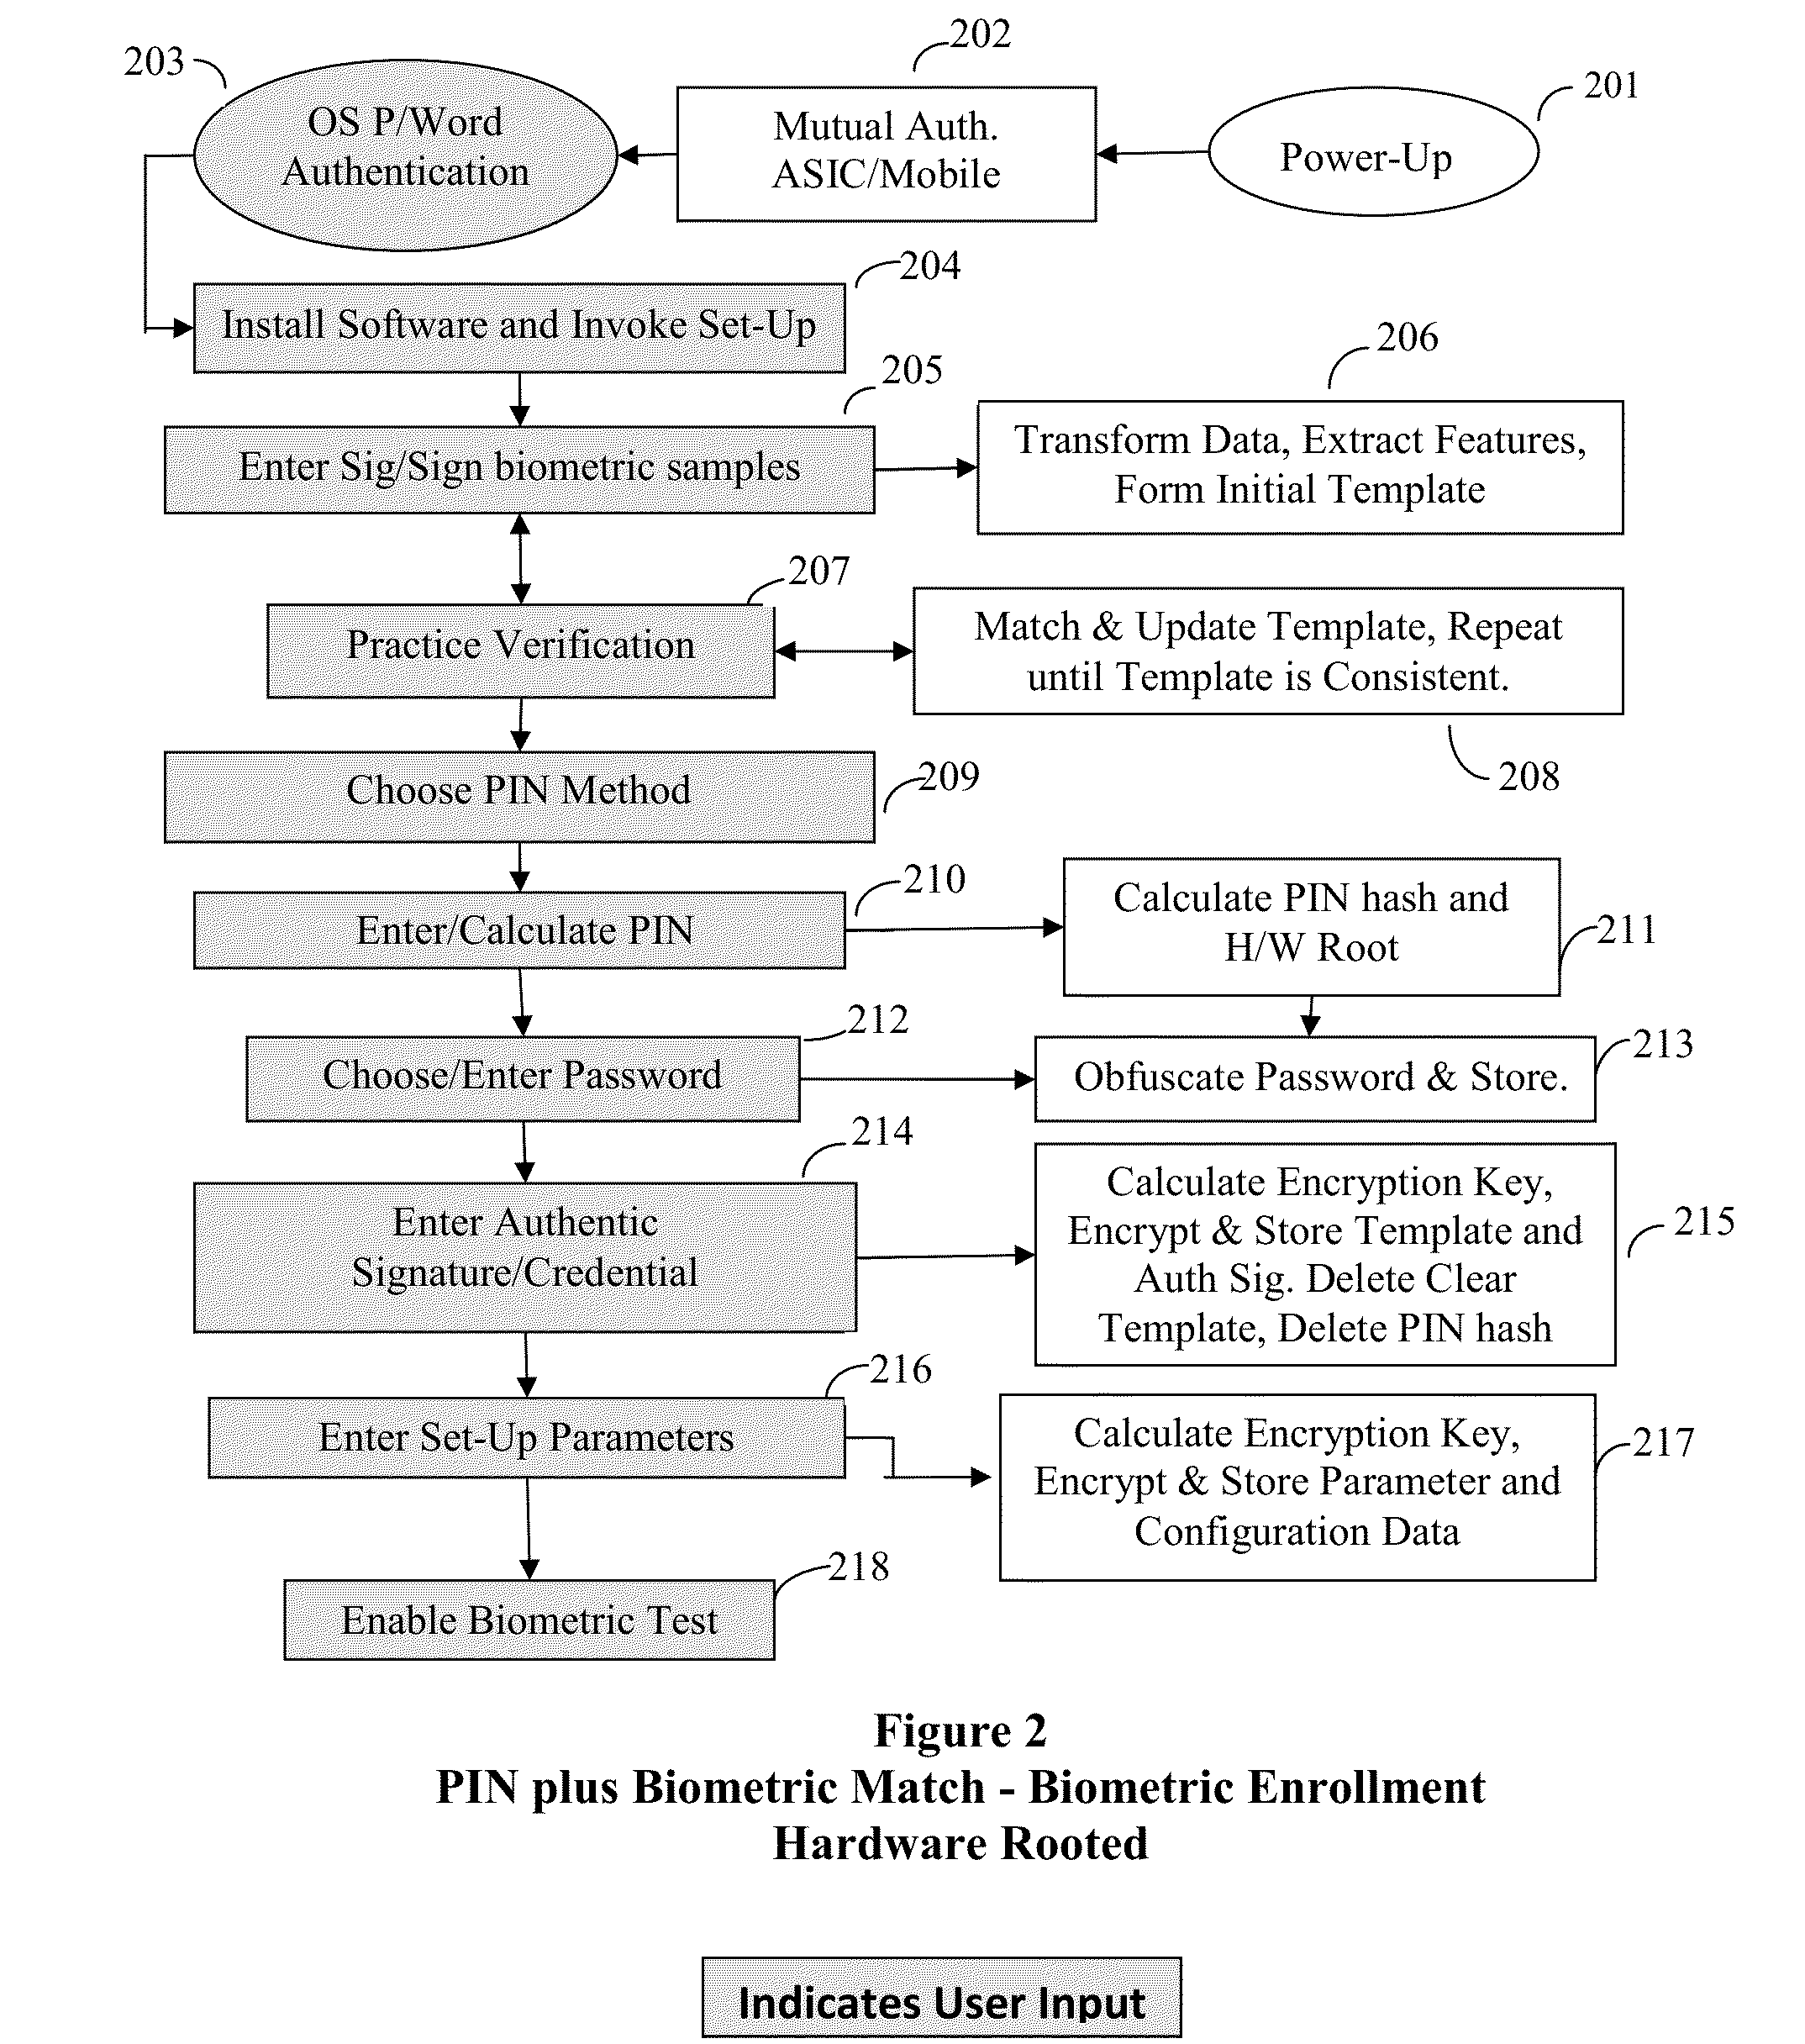 Method and System for Providing Password-free, Hardware-rooted, ASIC-based Authentication of a Human to a Mobile Device using Biometrics with a Protected, Local Template to Release Trusted Credentials to Relying Parties